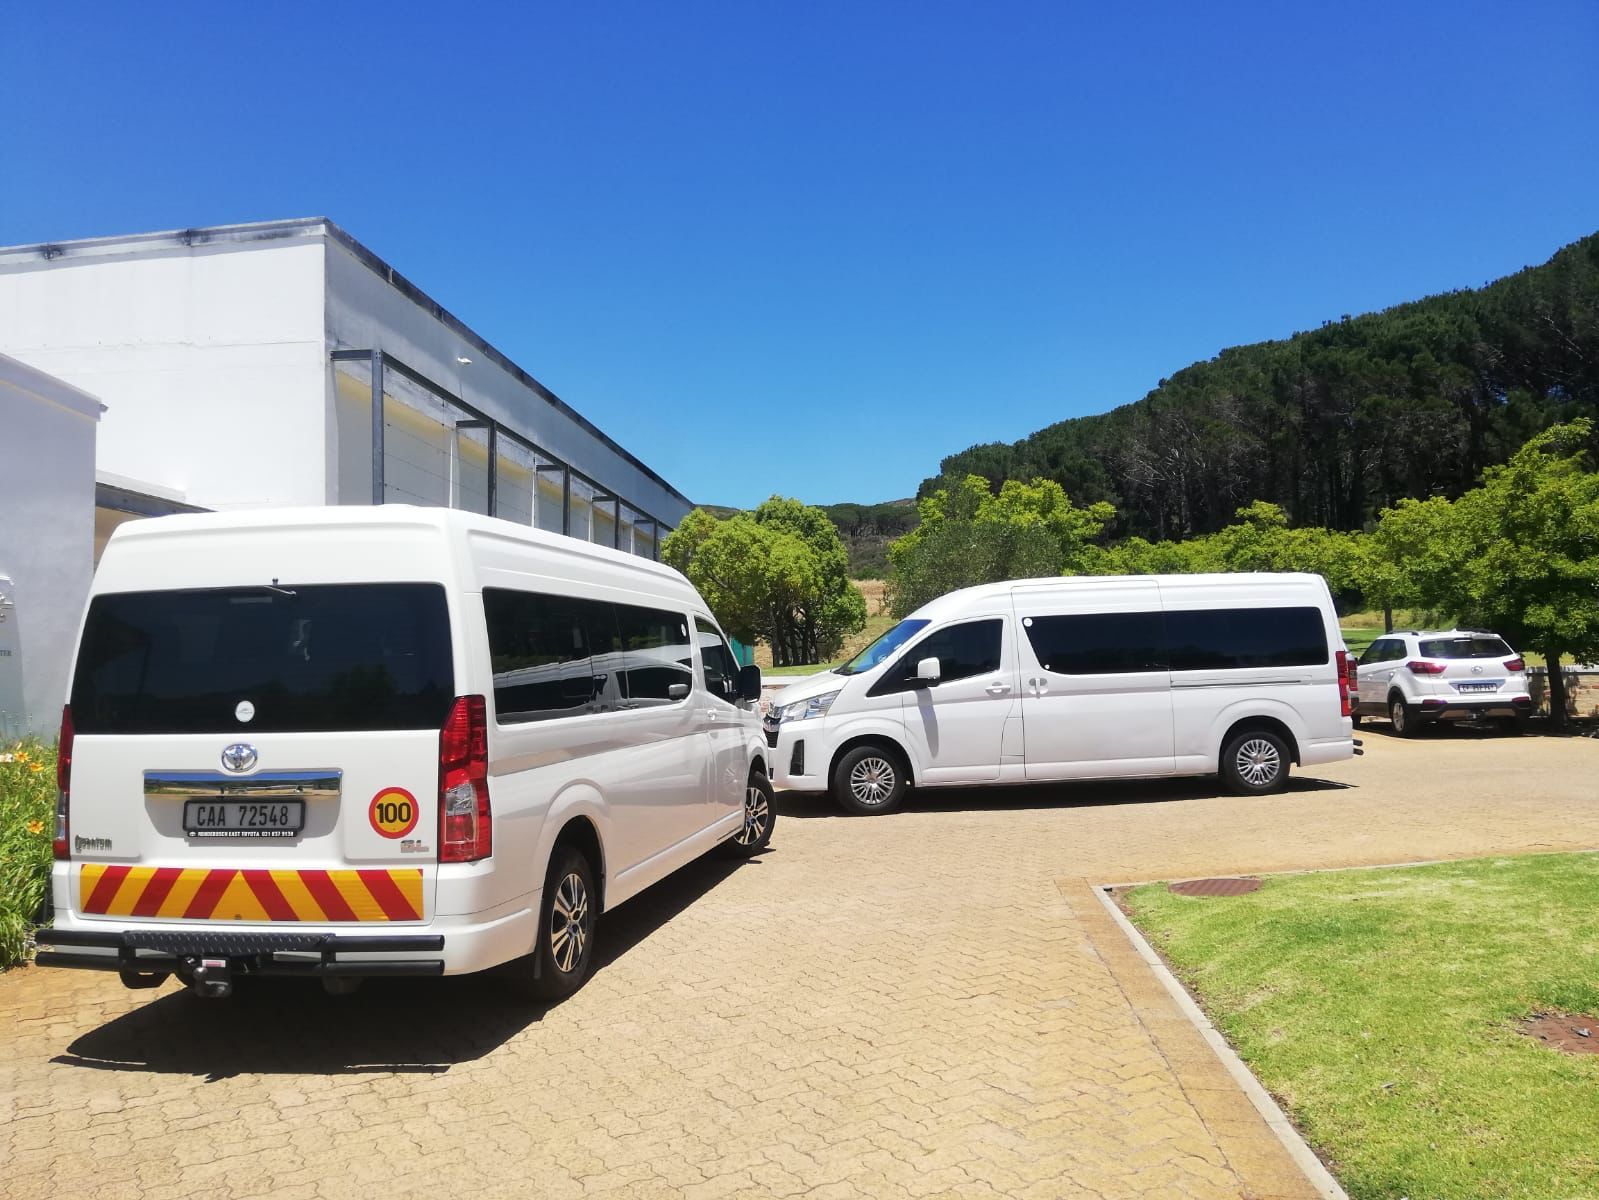 Three white vans are parked in a driveway in front of a building.